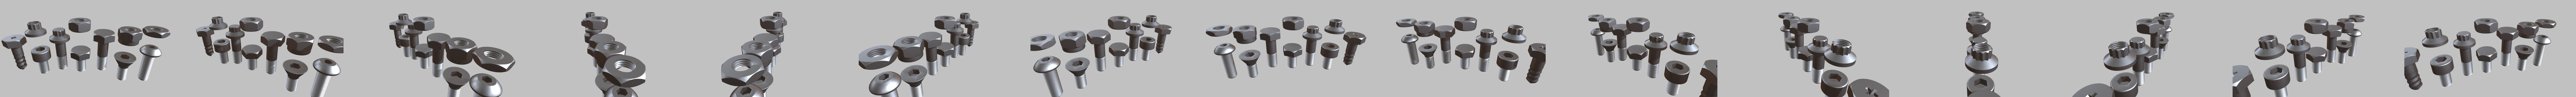 145,022 Nuts Bolts Images, Stock Photos, 3D objects, & Vectors